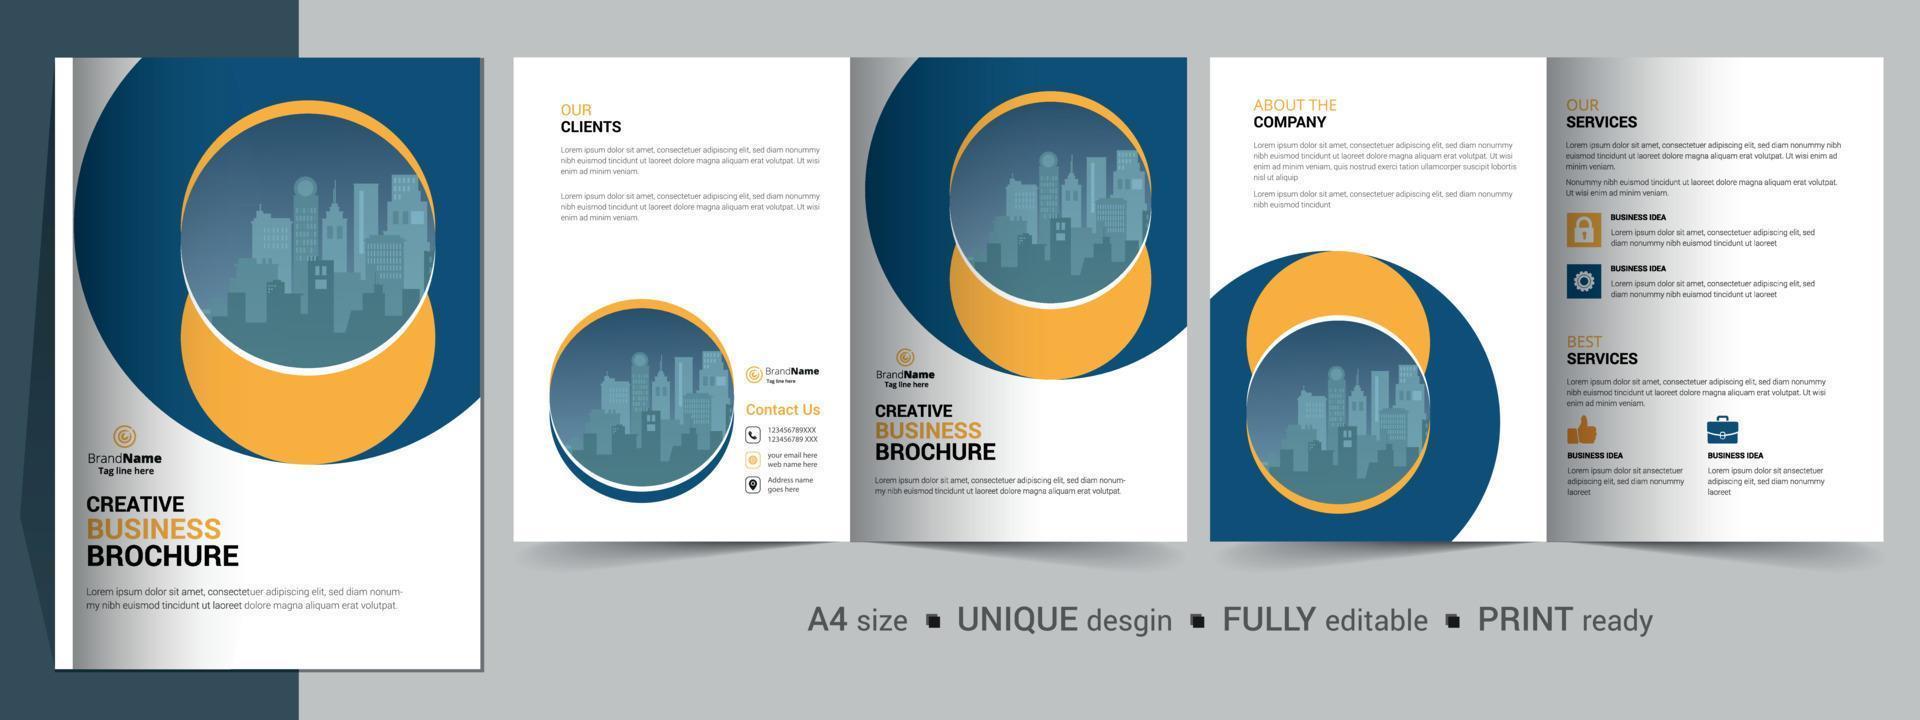 Bifold Brochure Design Template for Your Company, Corporate, Business, Advertising, Marketing, Agency, and Internet Business. vector